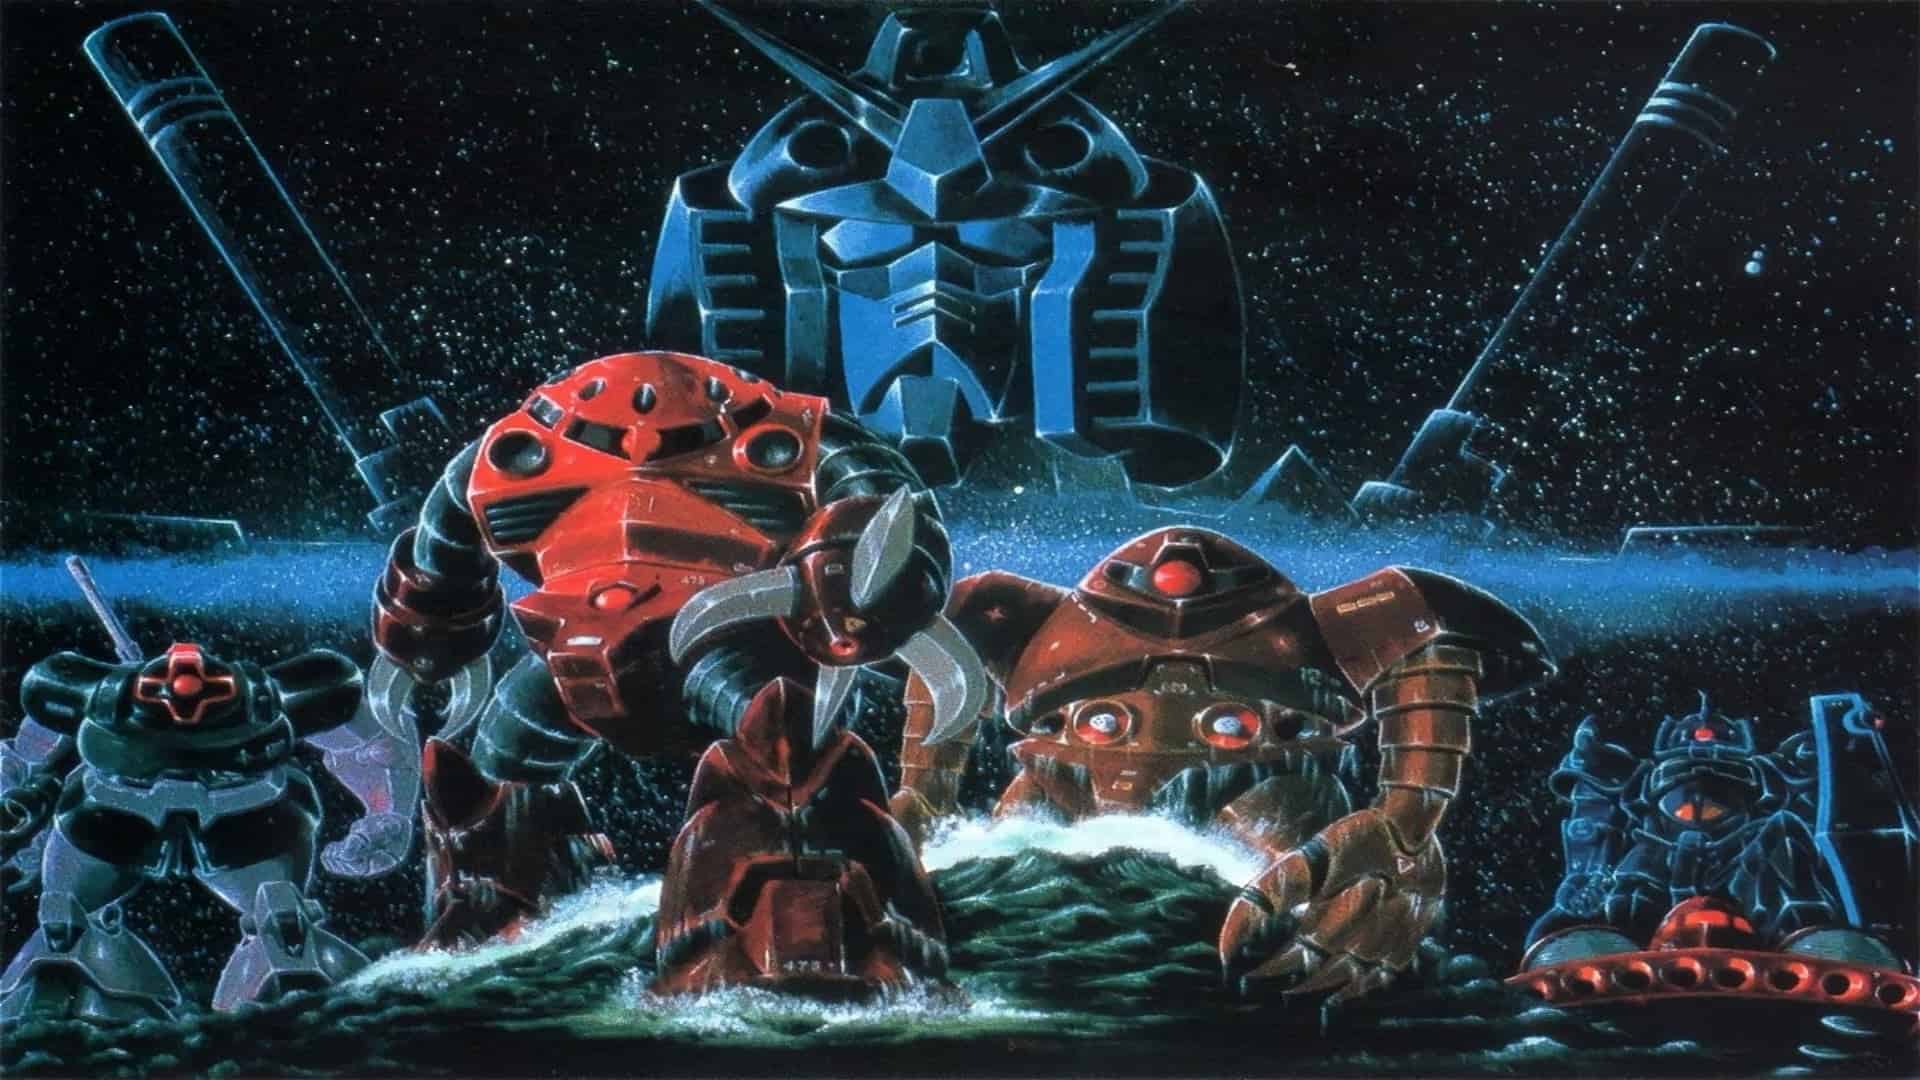 Mobile Suits in a still from the show